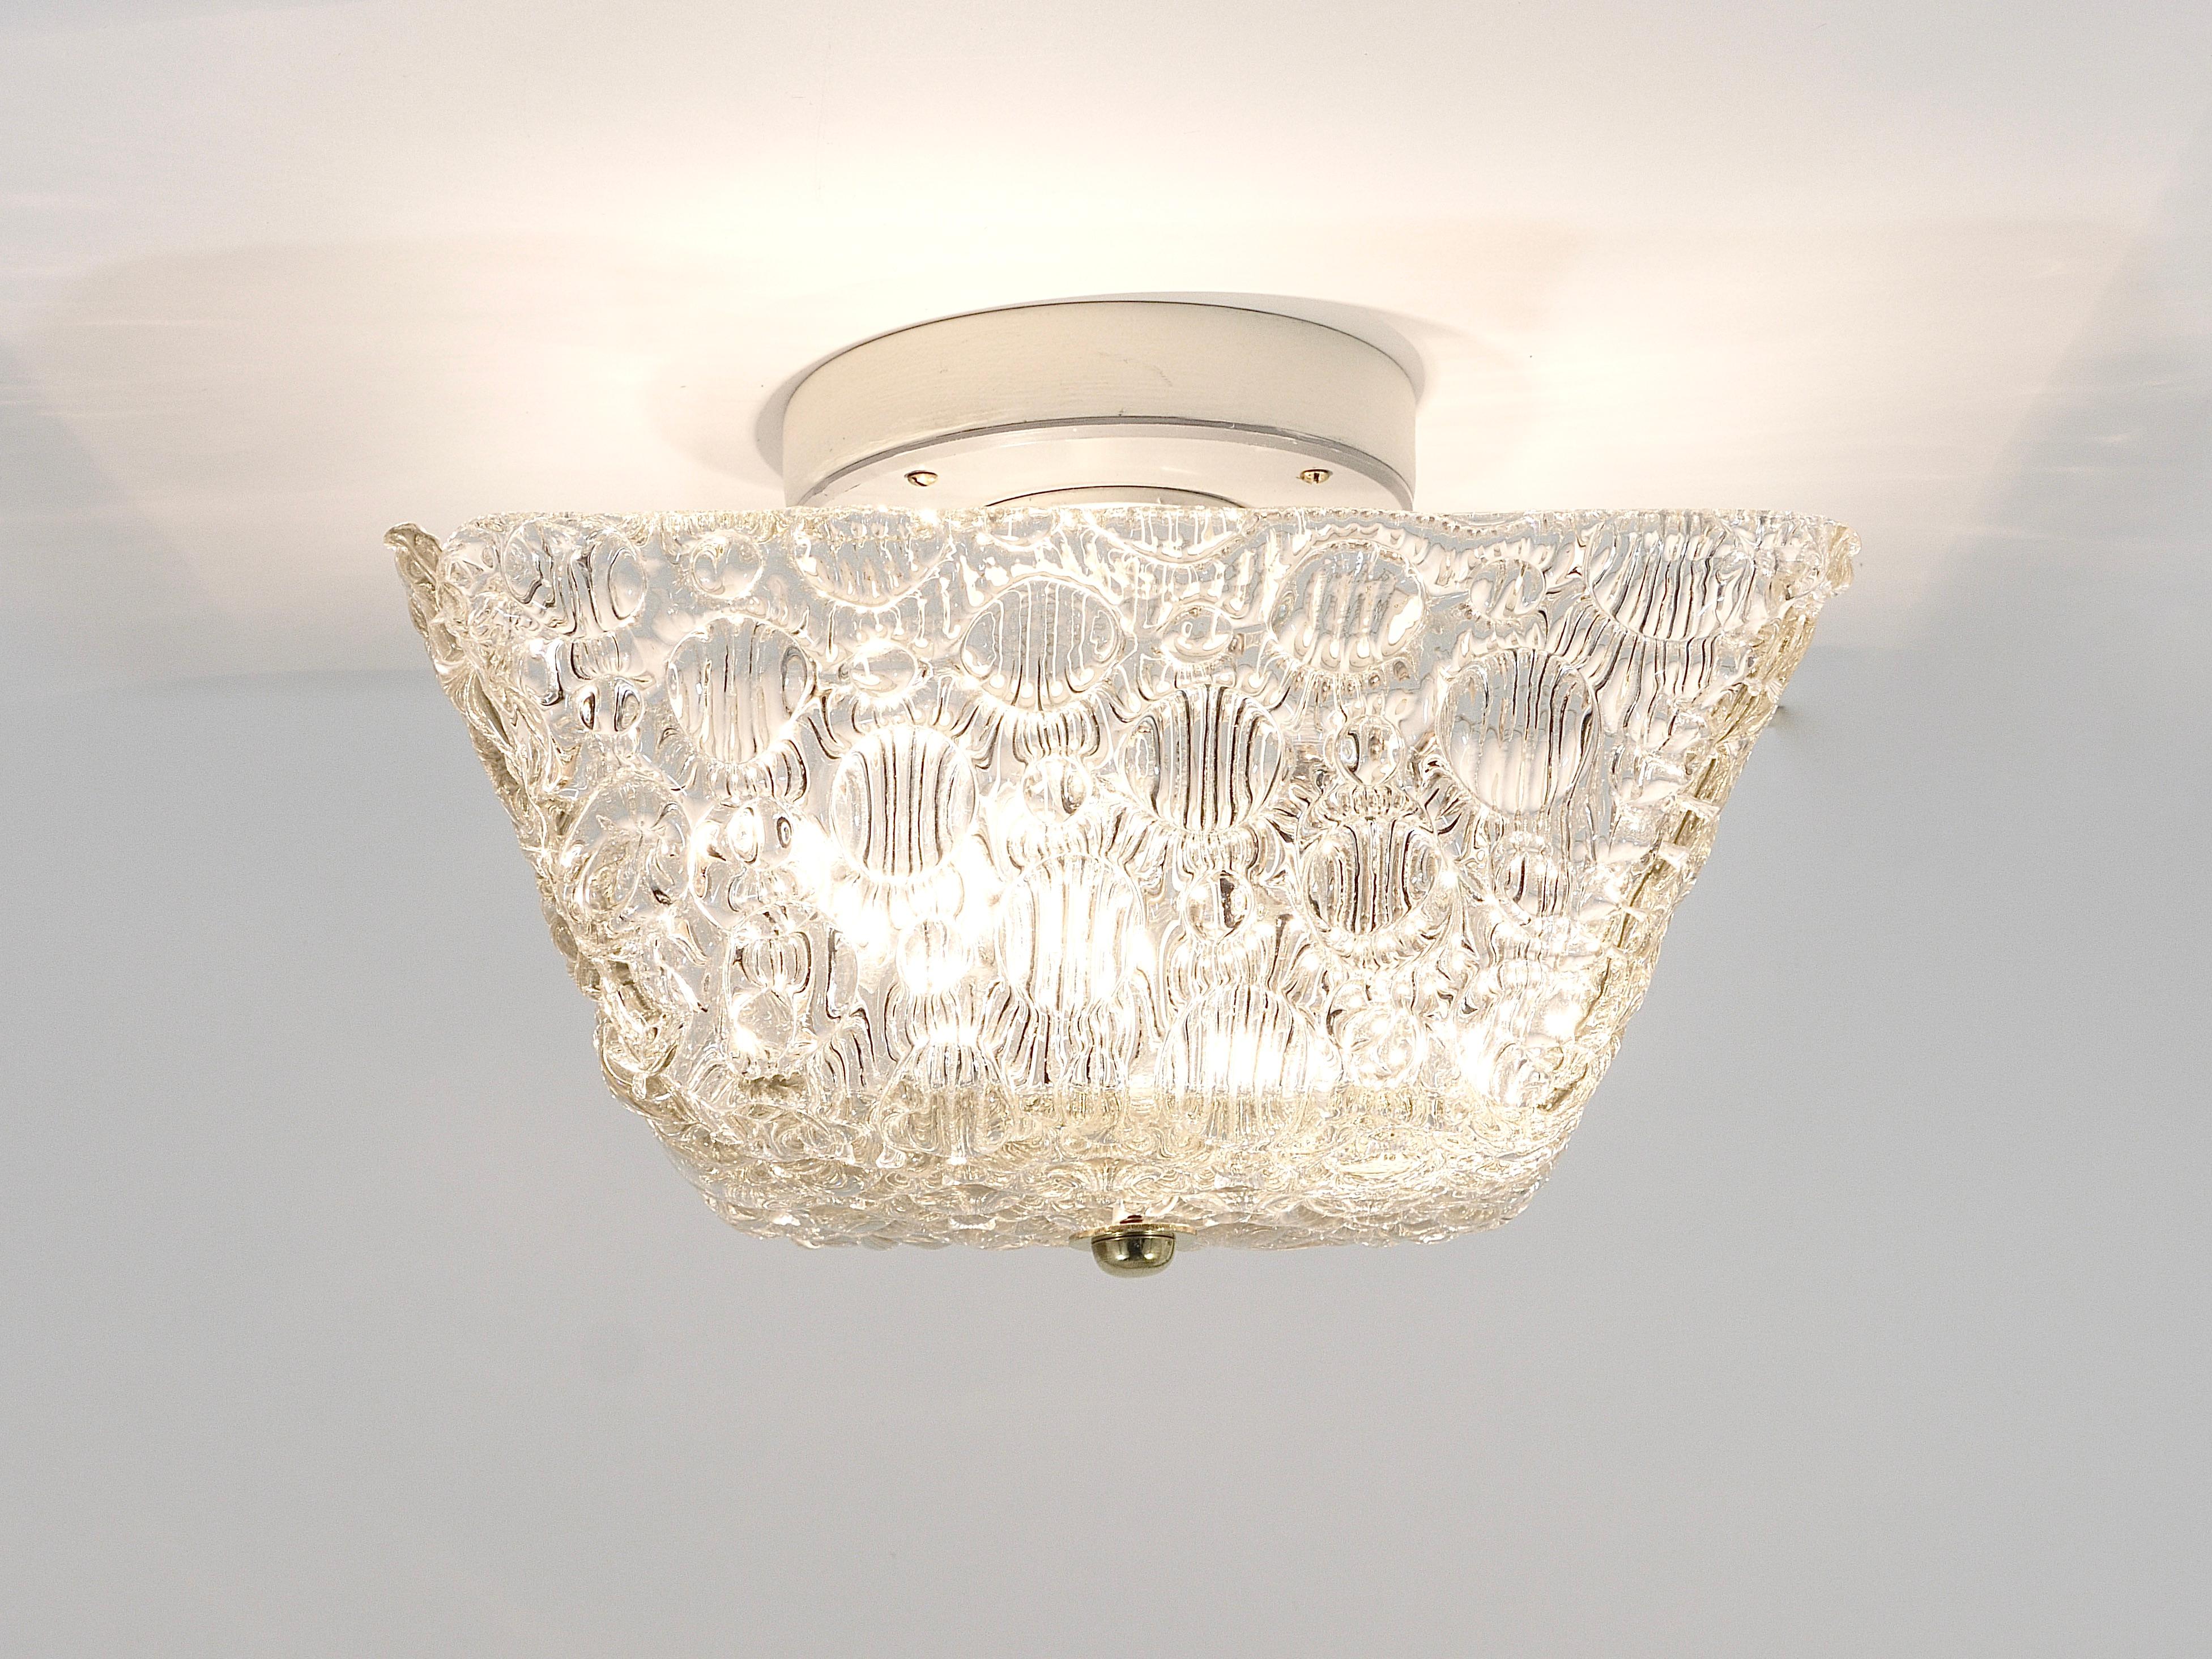 Introducing a charming Mid-Century flush mount or ceiling lamp. Crafted with a square lampshade from textured melting glass, reminiscent of ice, and adorned with a brass knob in the center. Manufactured by J.T. Kalmar Vienna / Austria in the 1950s,